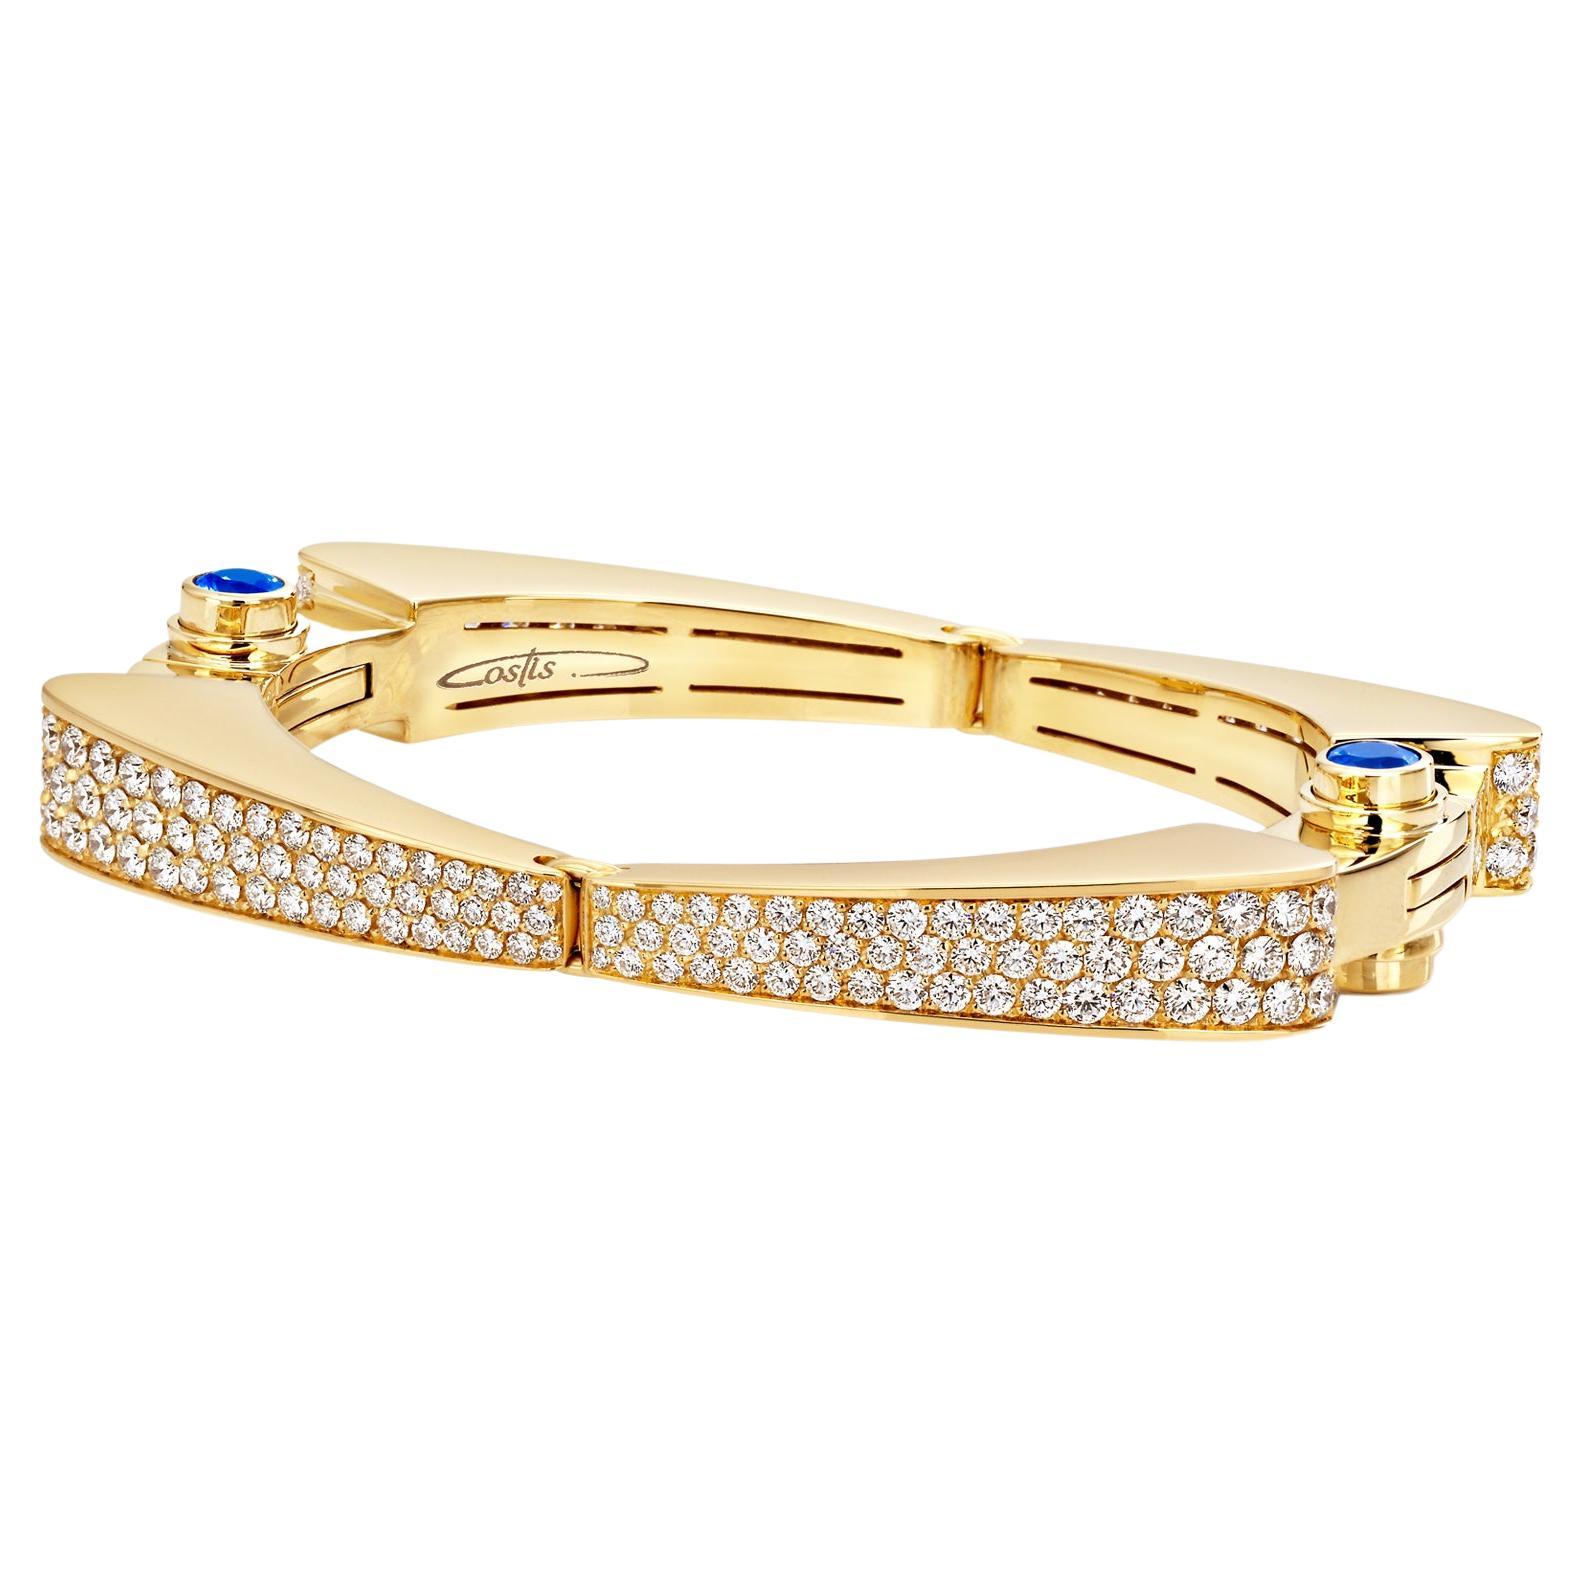 "Costis" Symmetry Cuff Pave' with Diamonds and Ceylon Royal Blue Sapphires For Sale